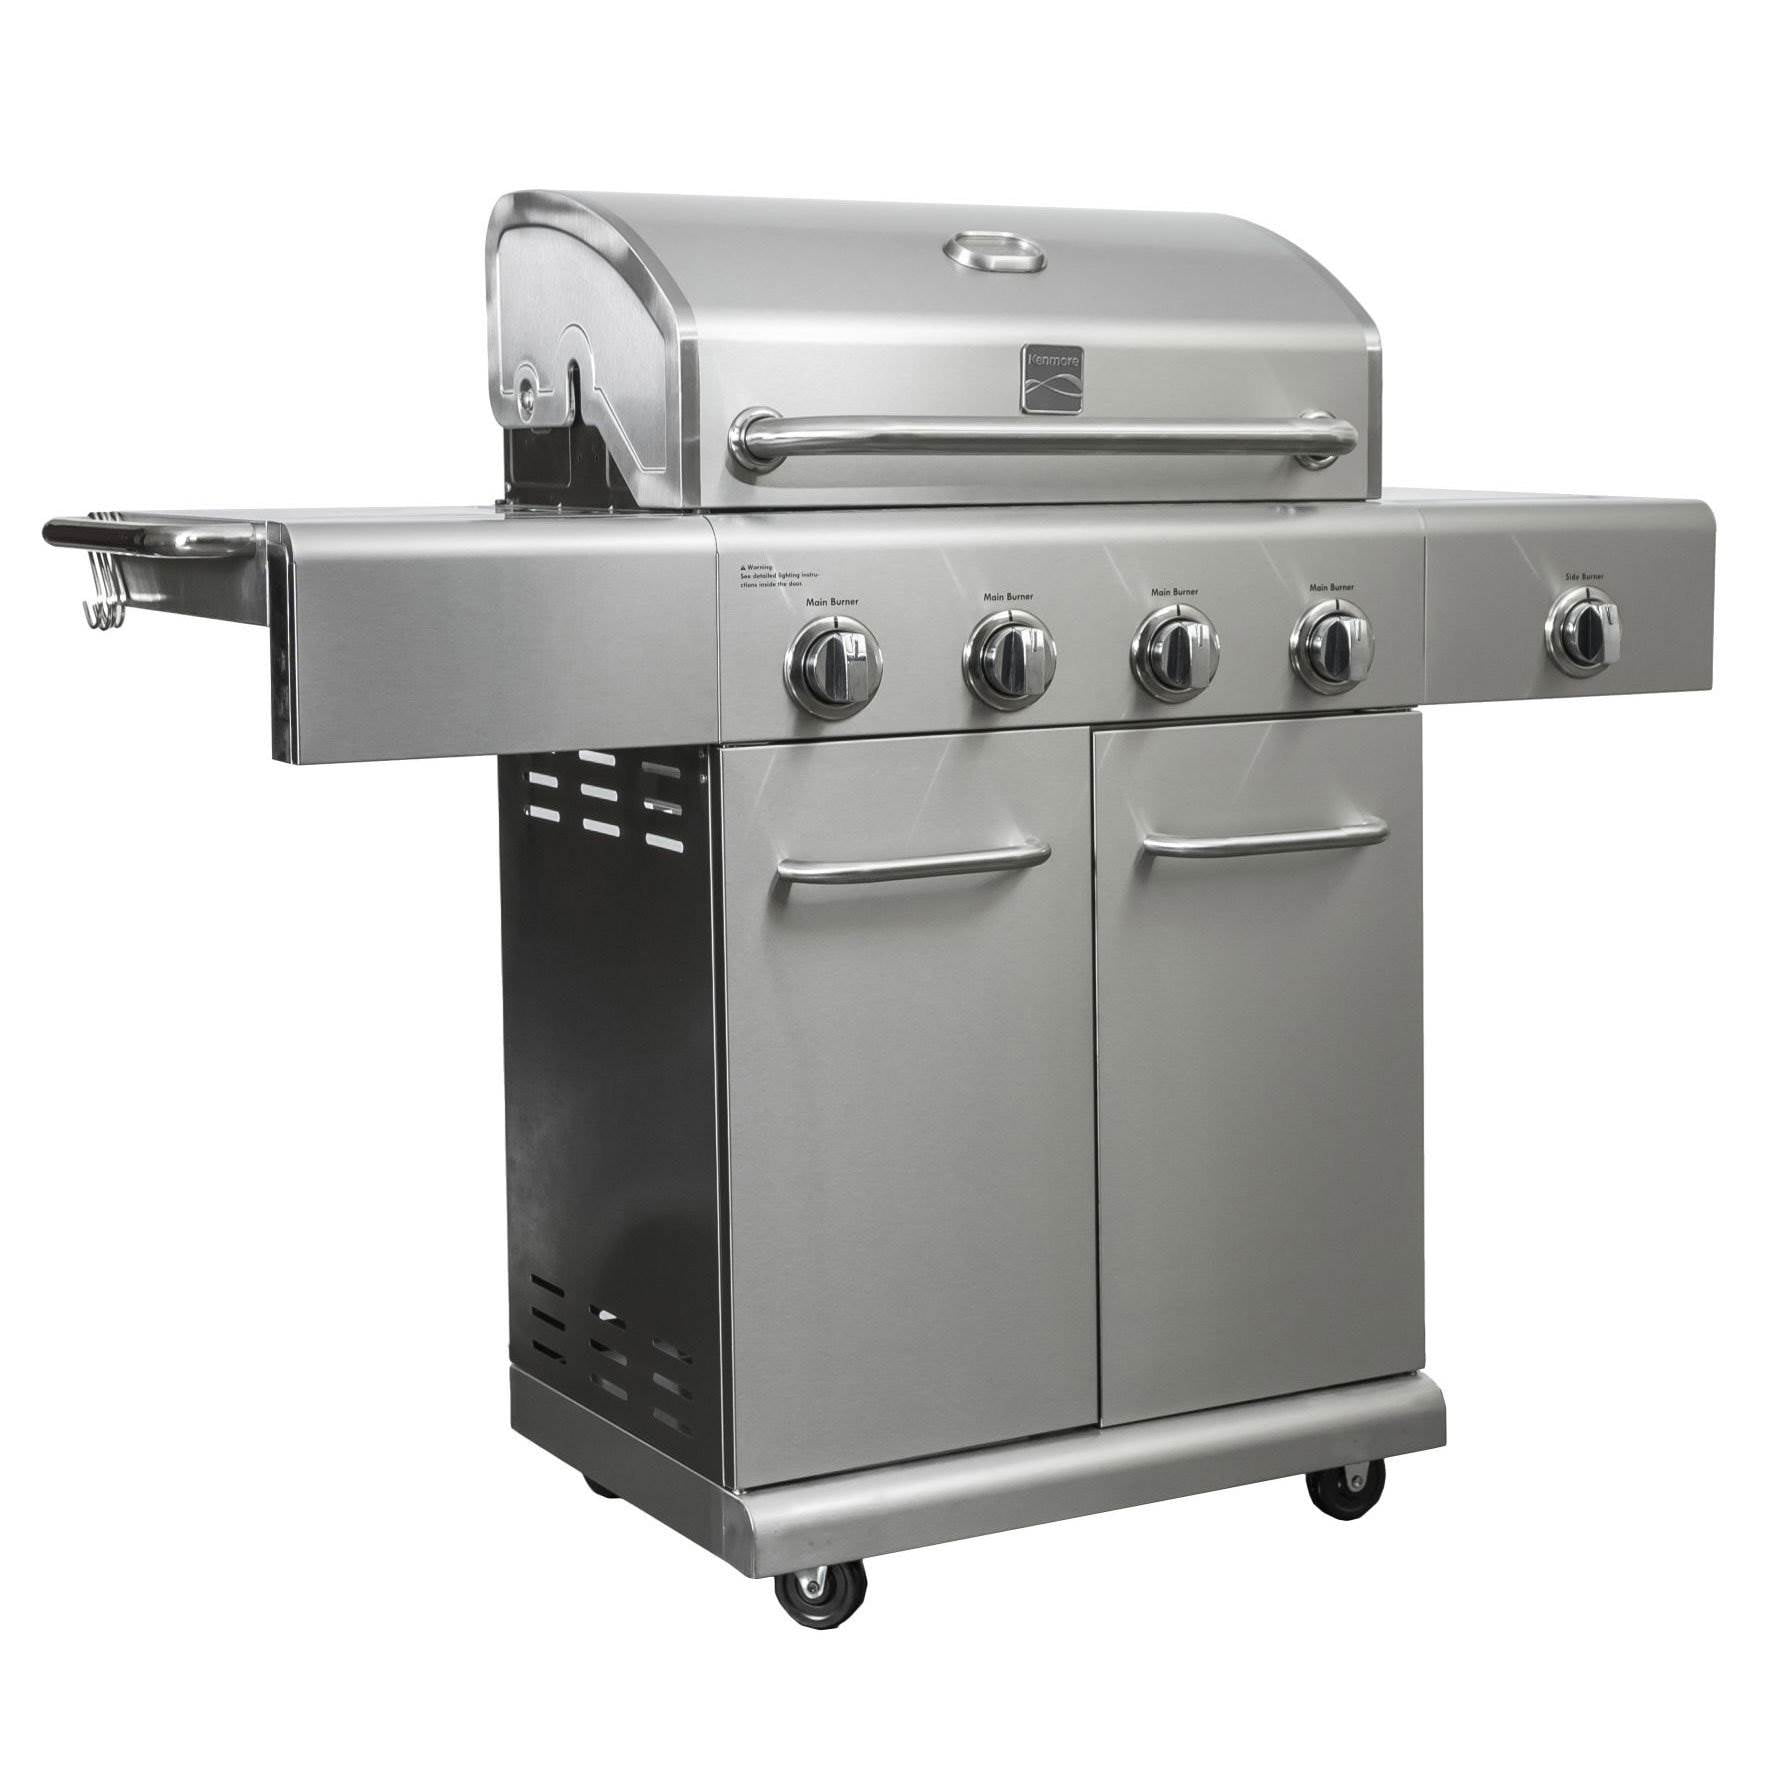 Kenmore 4 Burner 53000 BTU Stainless BBQ Propane Grill w/ Searing Side ...